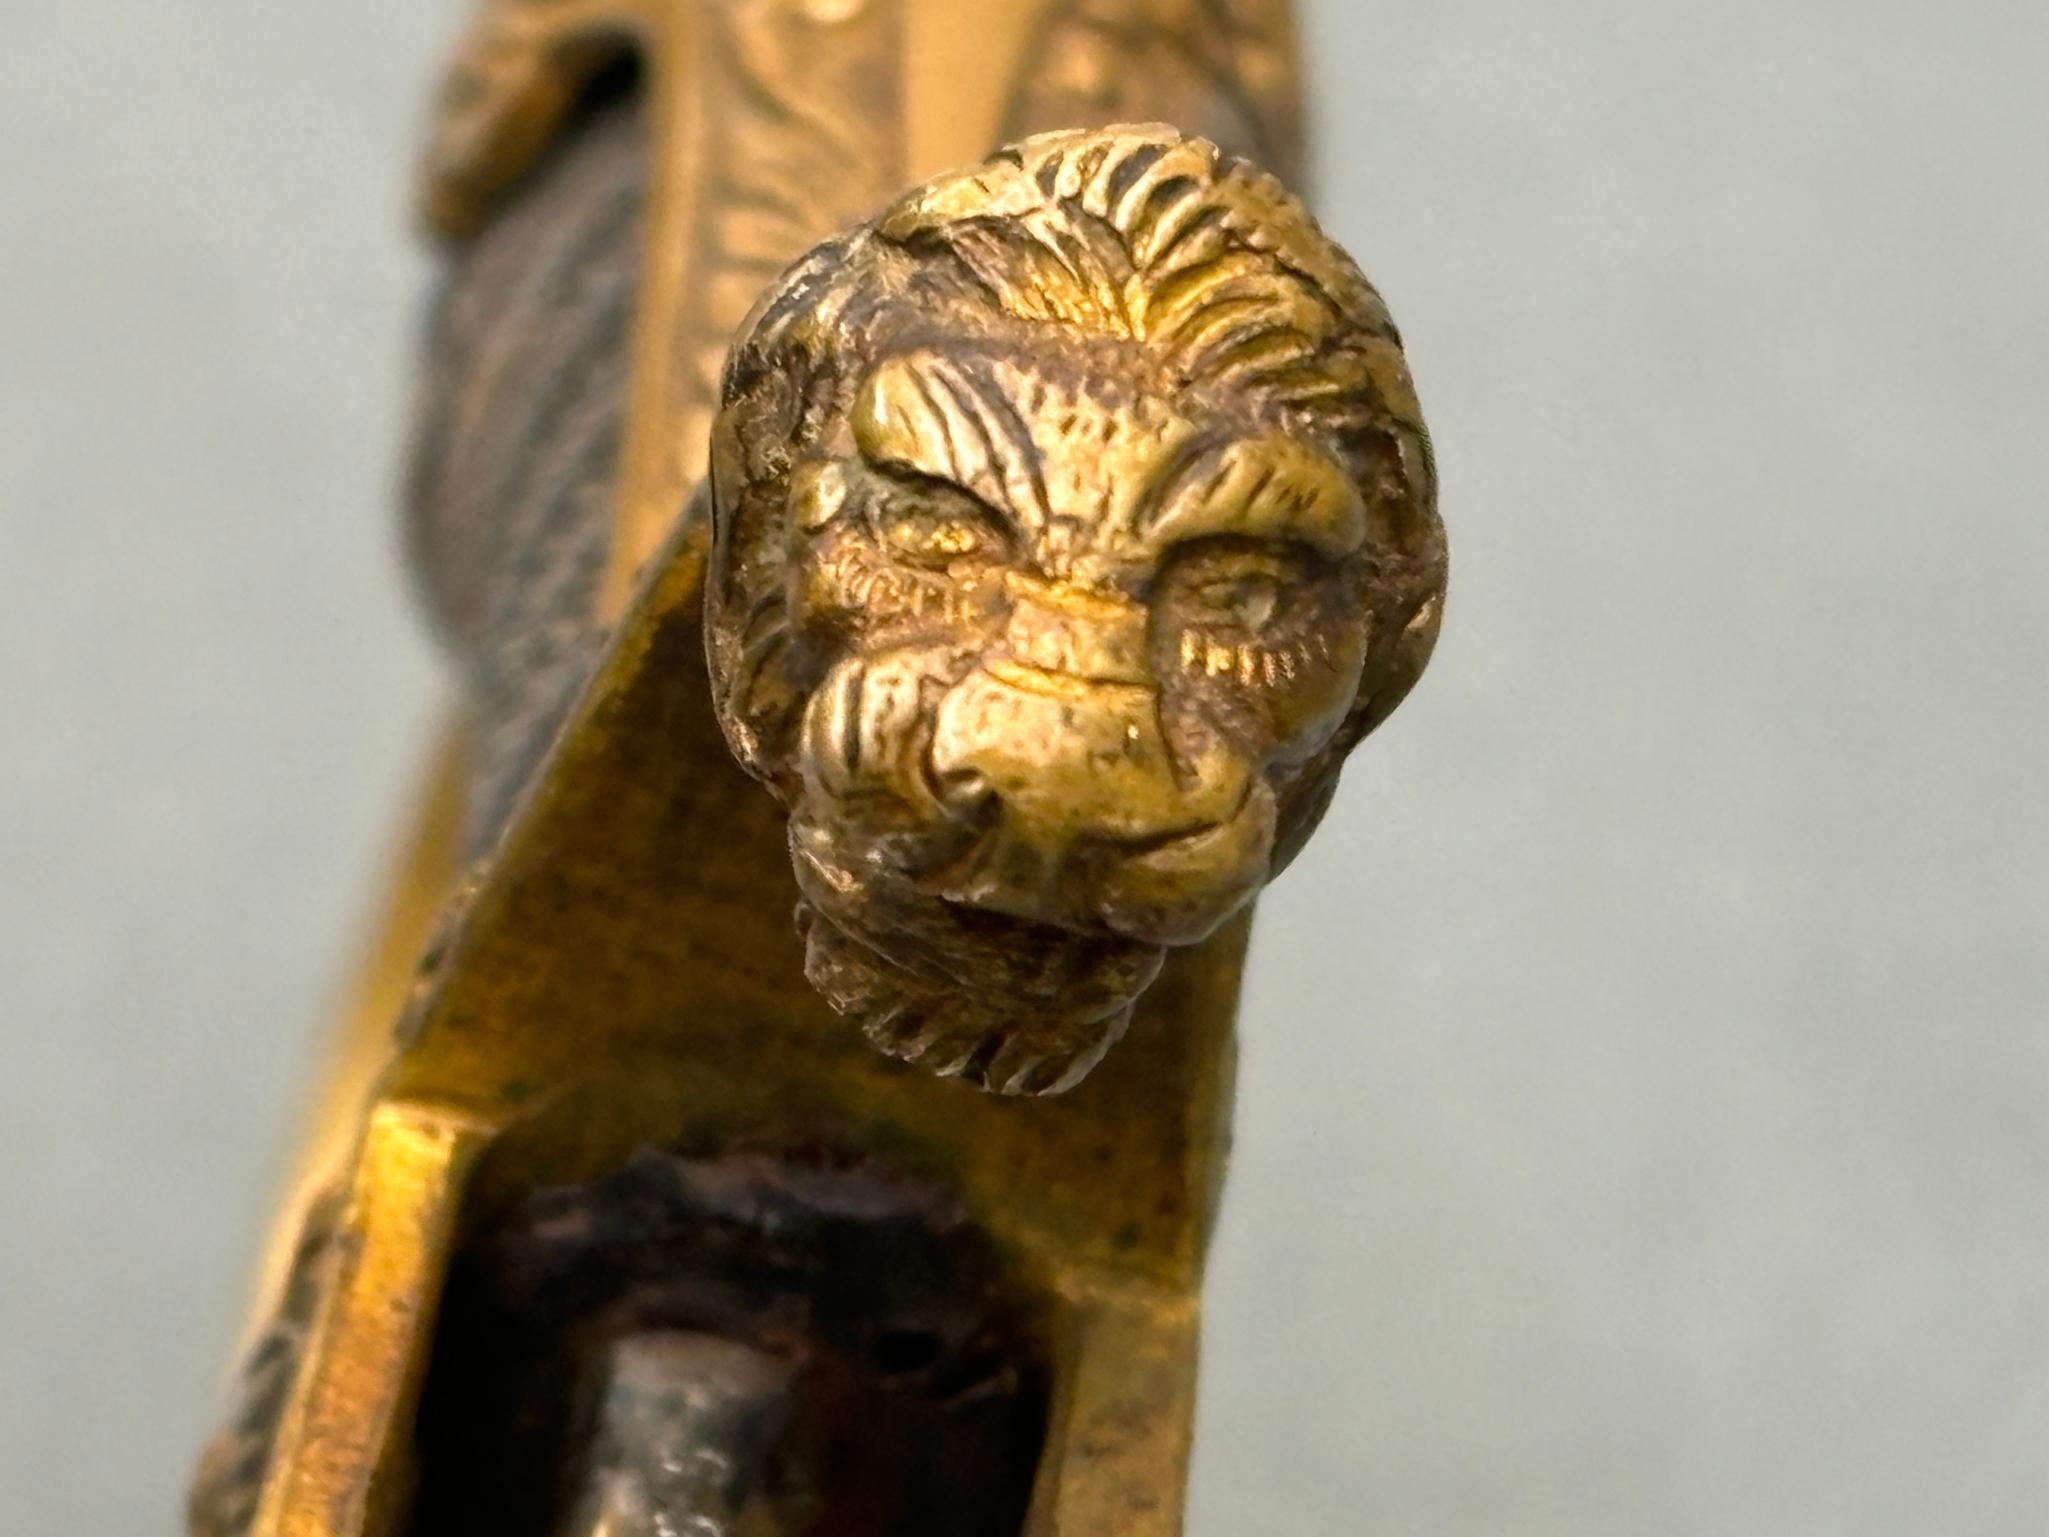 WWI IMPERIAL GERMAN LION HEAD ARTILLERY SWORD - JAWLESS VARIANT BY OTTO MERTENS